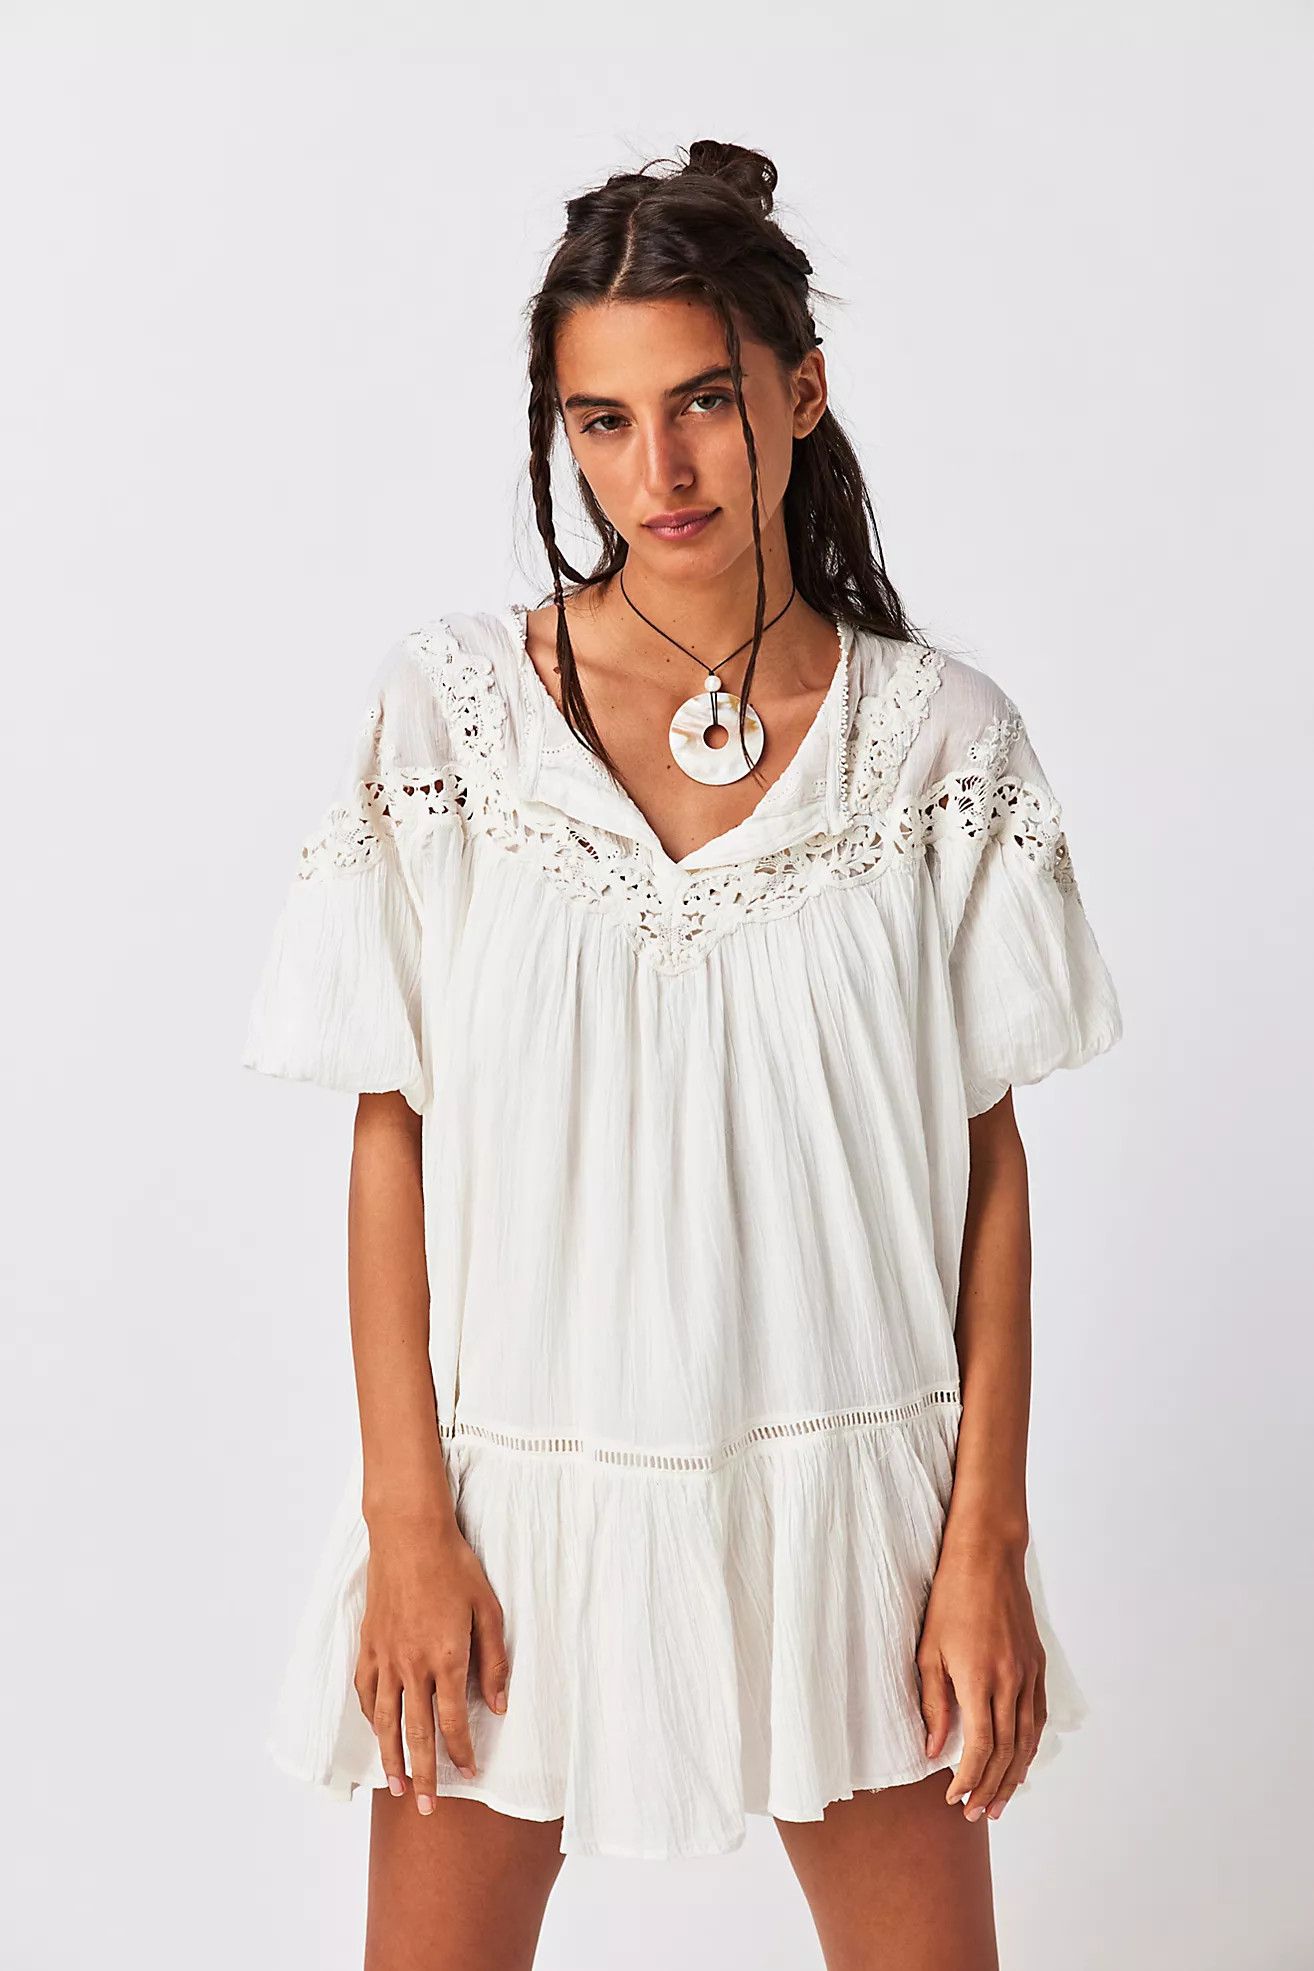 Misty Morning Mini Dress - Free People, Summer Outfits | Free People (Global - UK&FR Excluded)